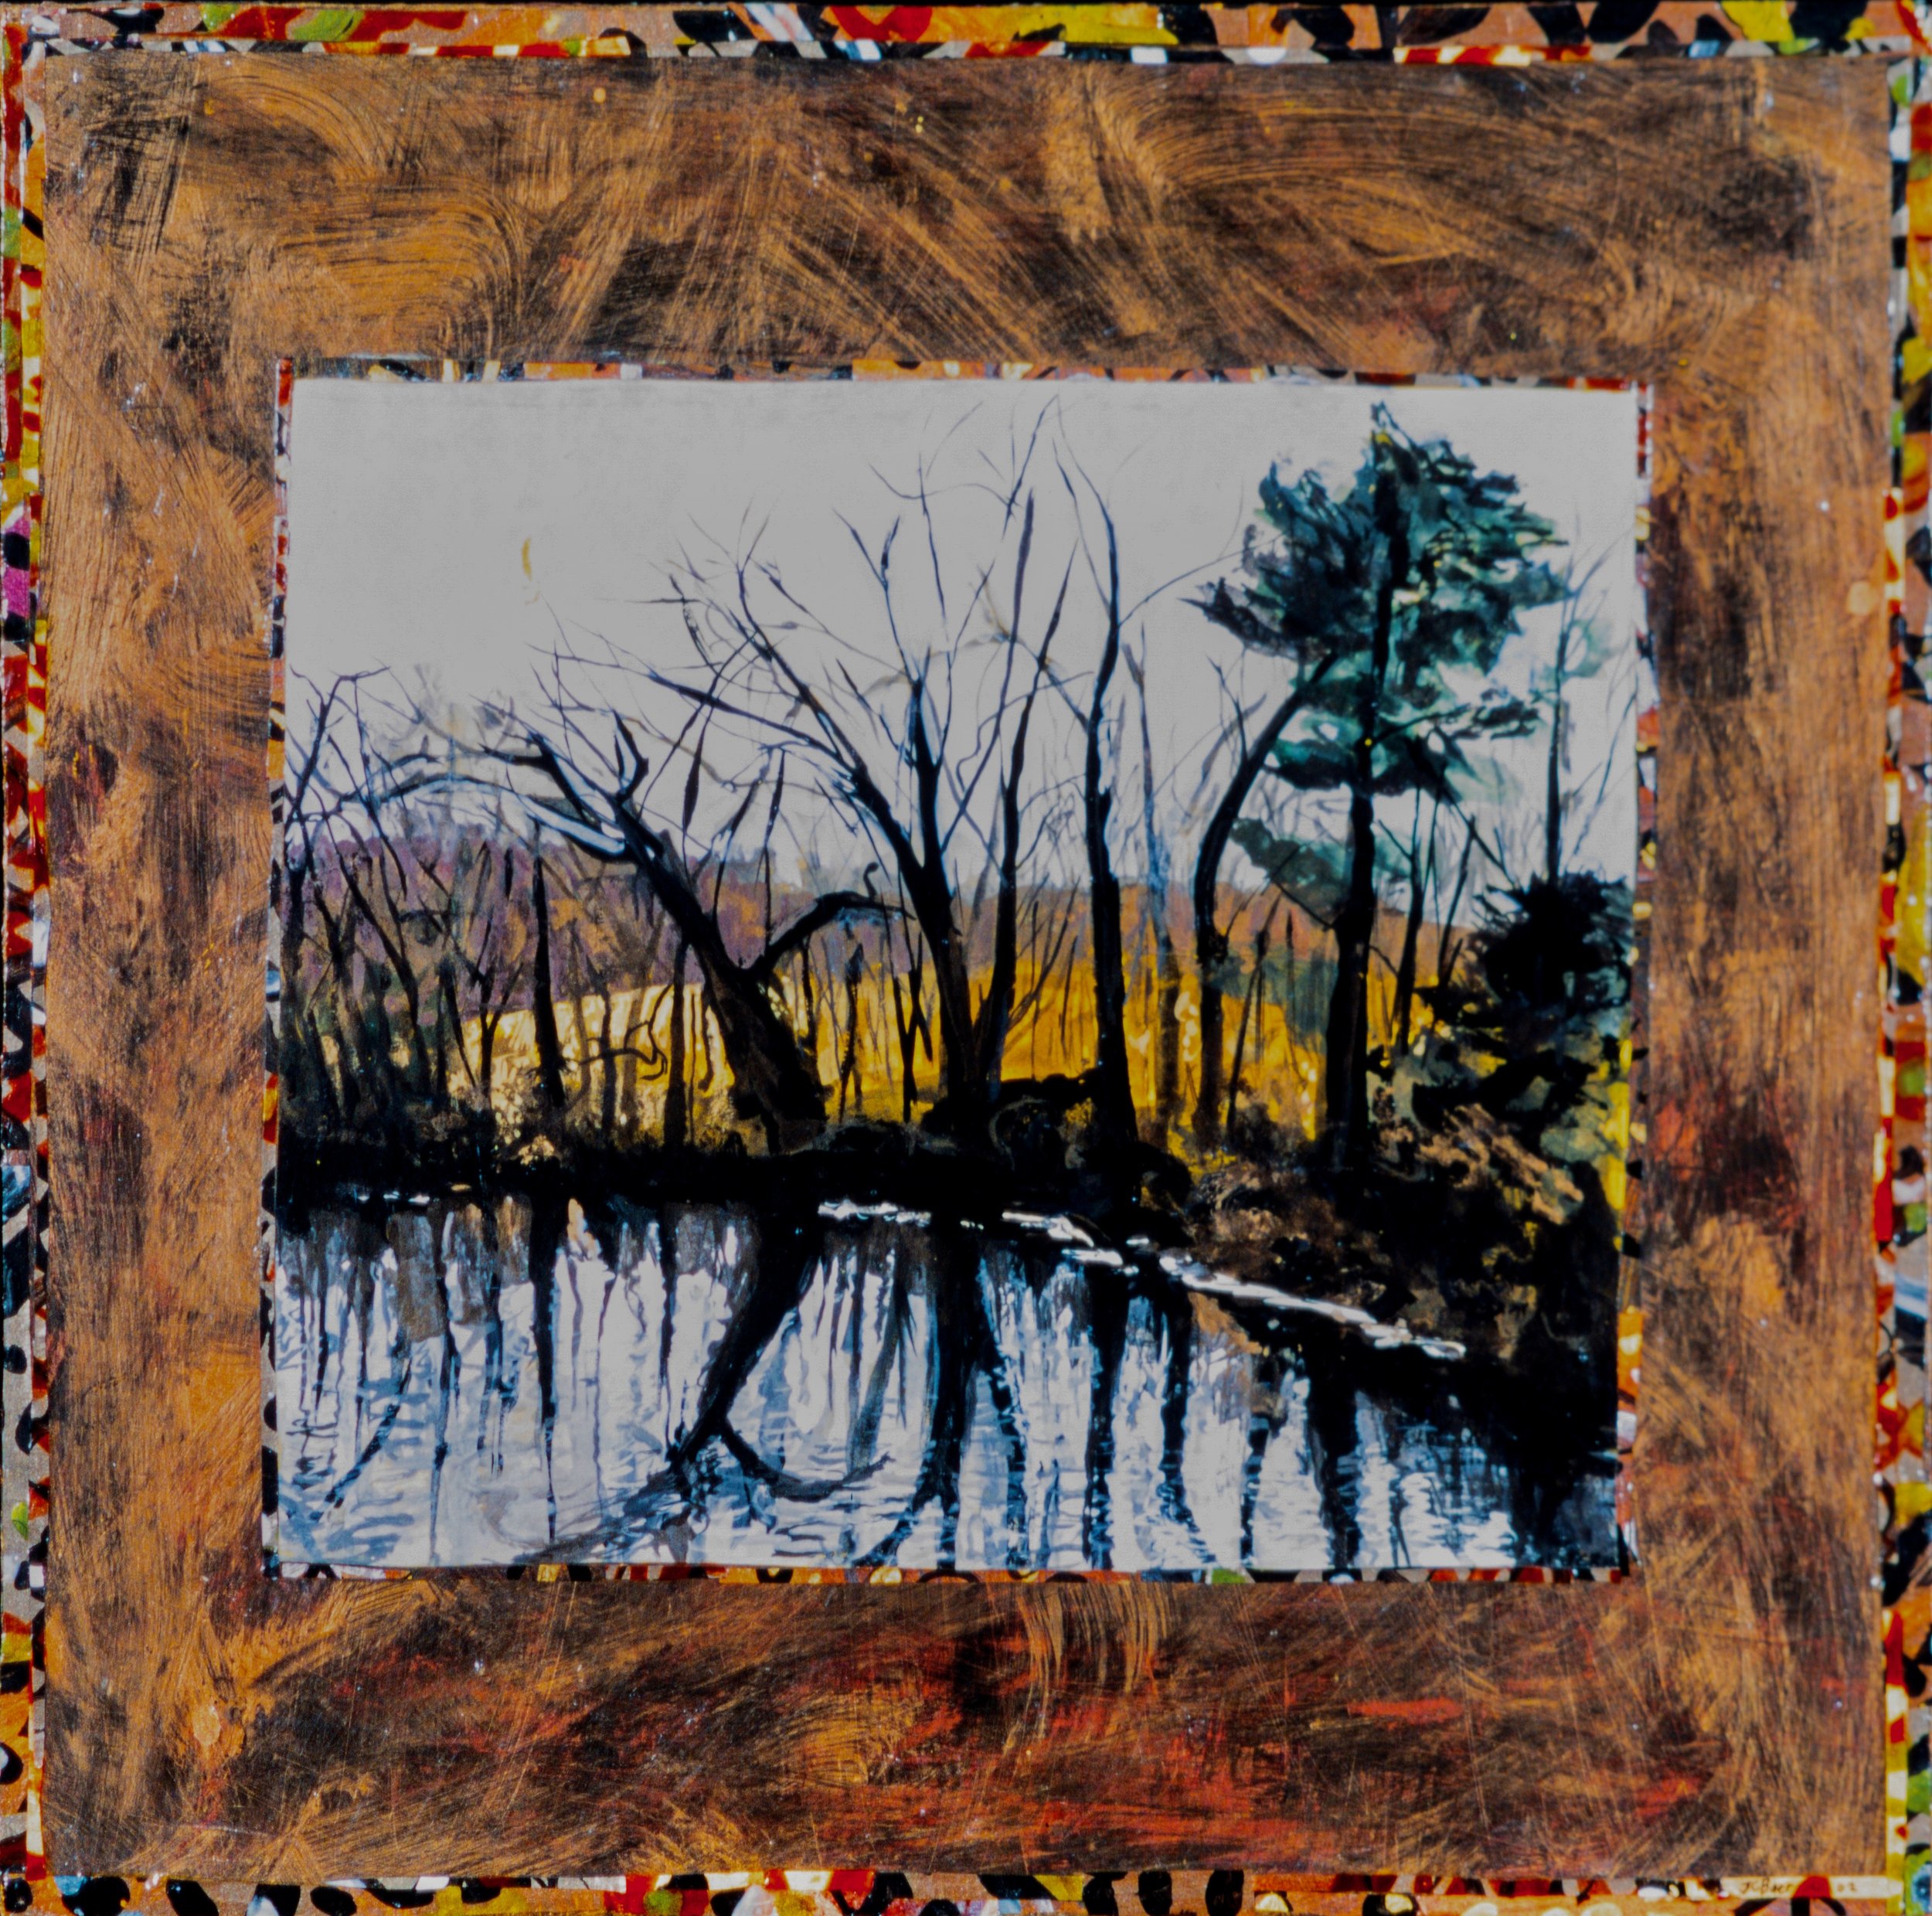 Charles River Peninsula, 2002, 16 x 16, gouache and acrylic on wood panel, NFS